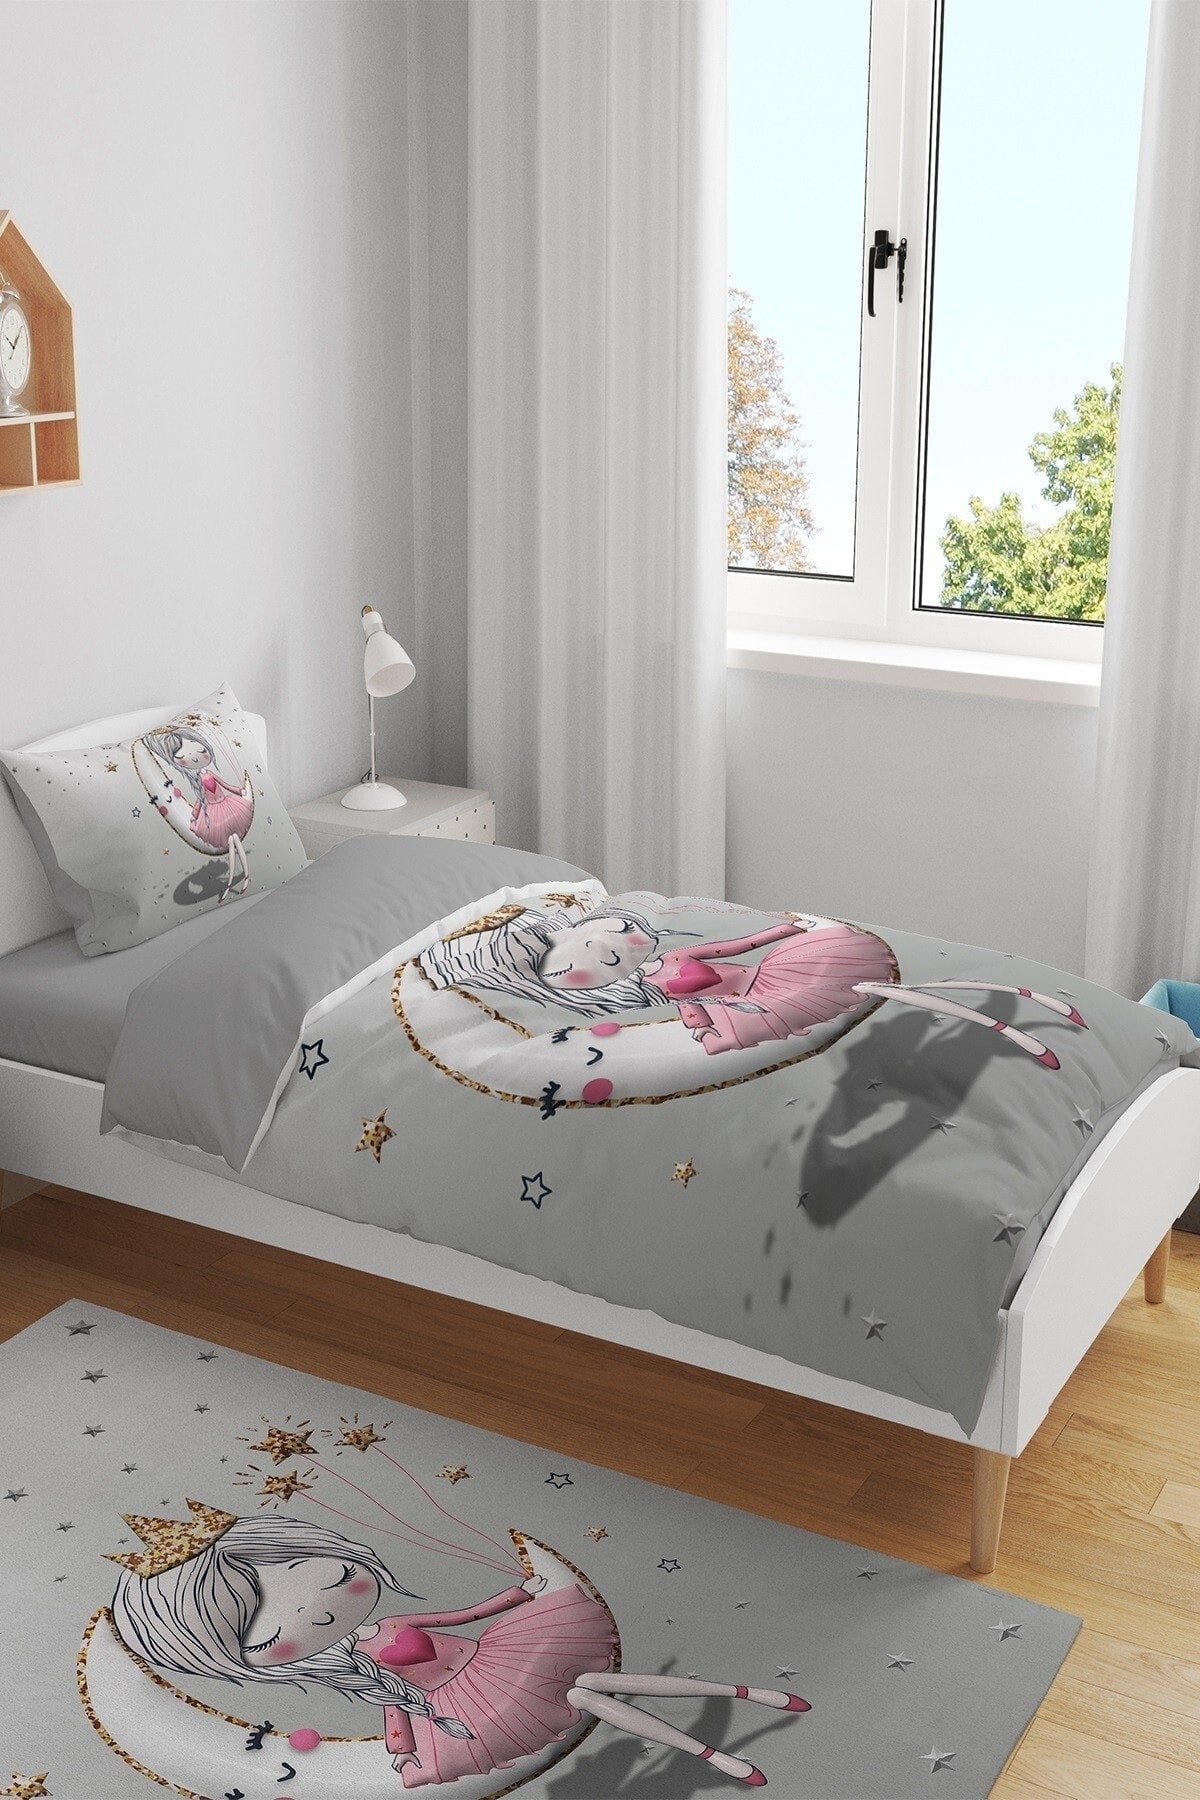 3D Gray Moon Sitting Princess Patterned Single Baby Child Duvet Cover Set